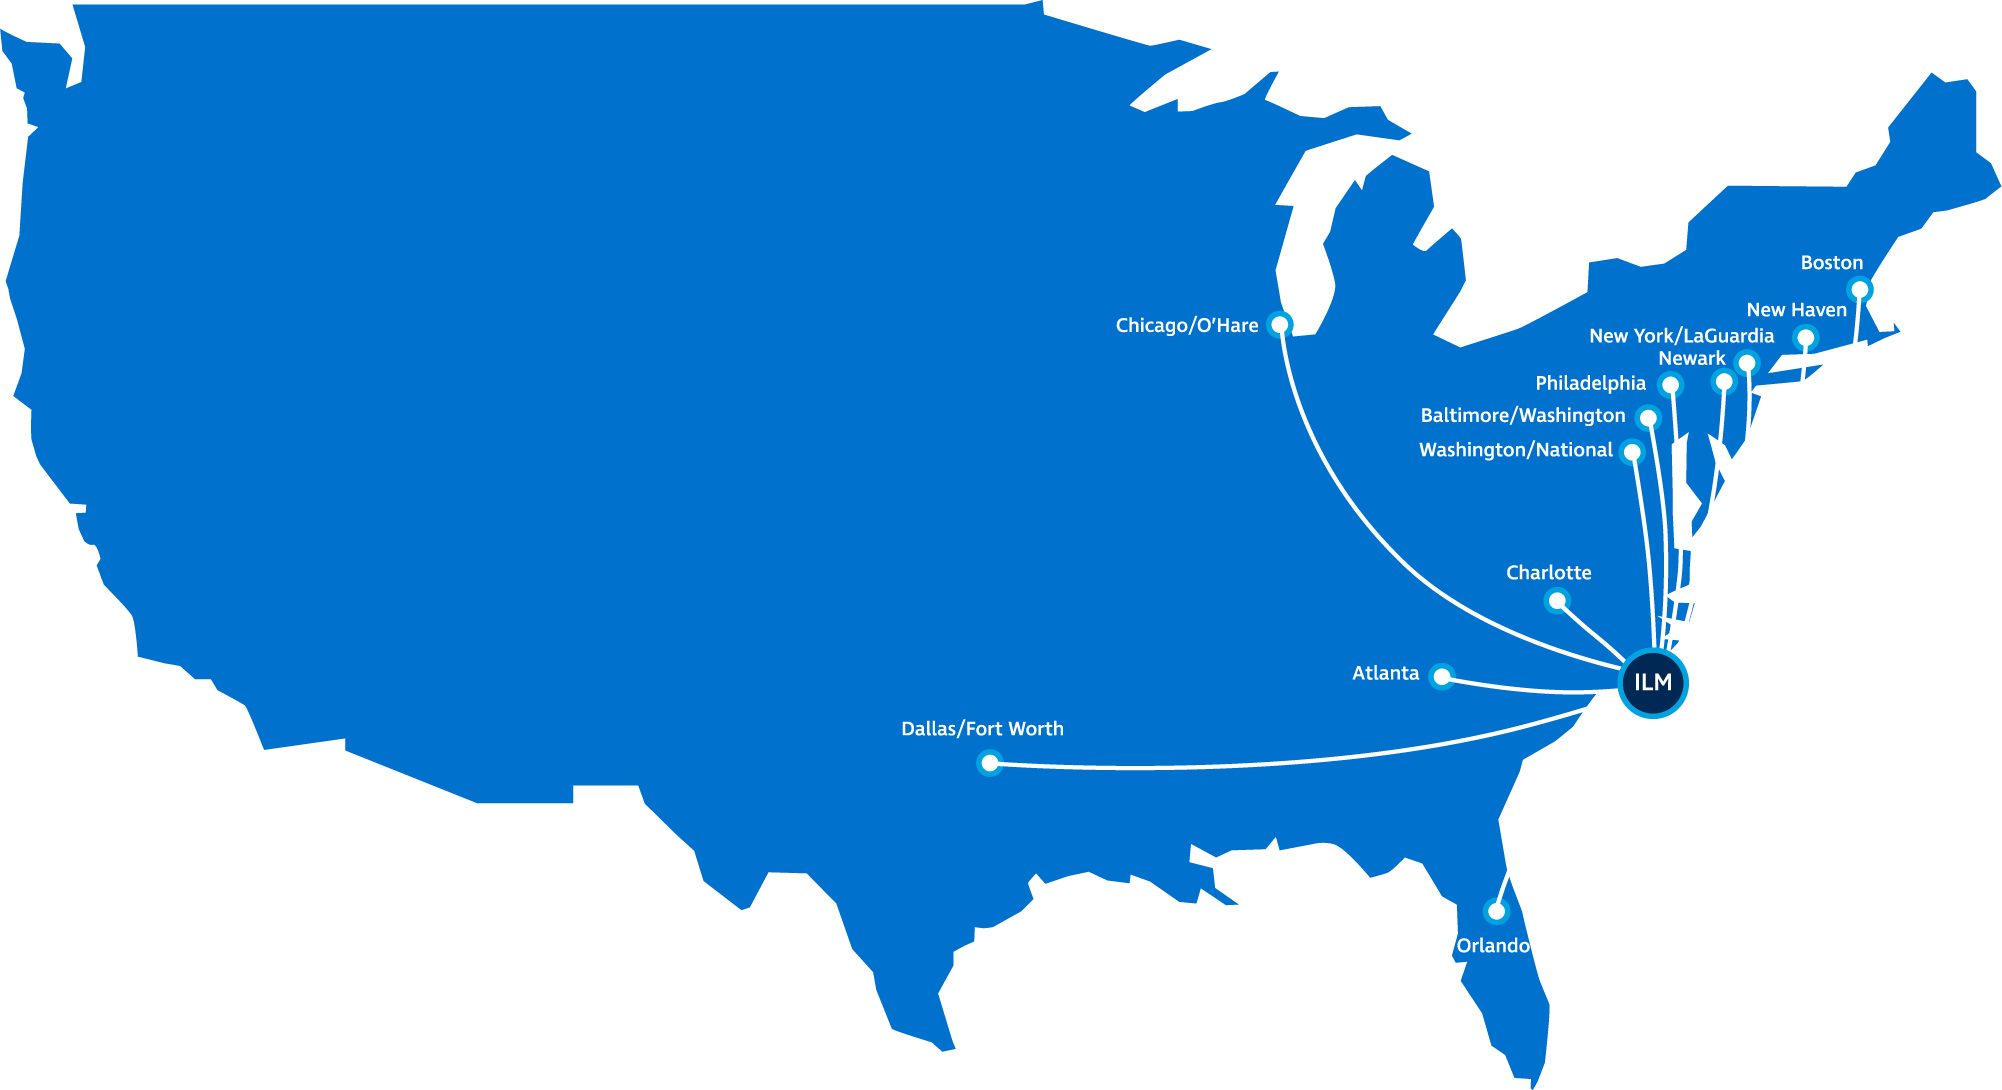 Map of United States with non-stop destinations